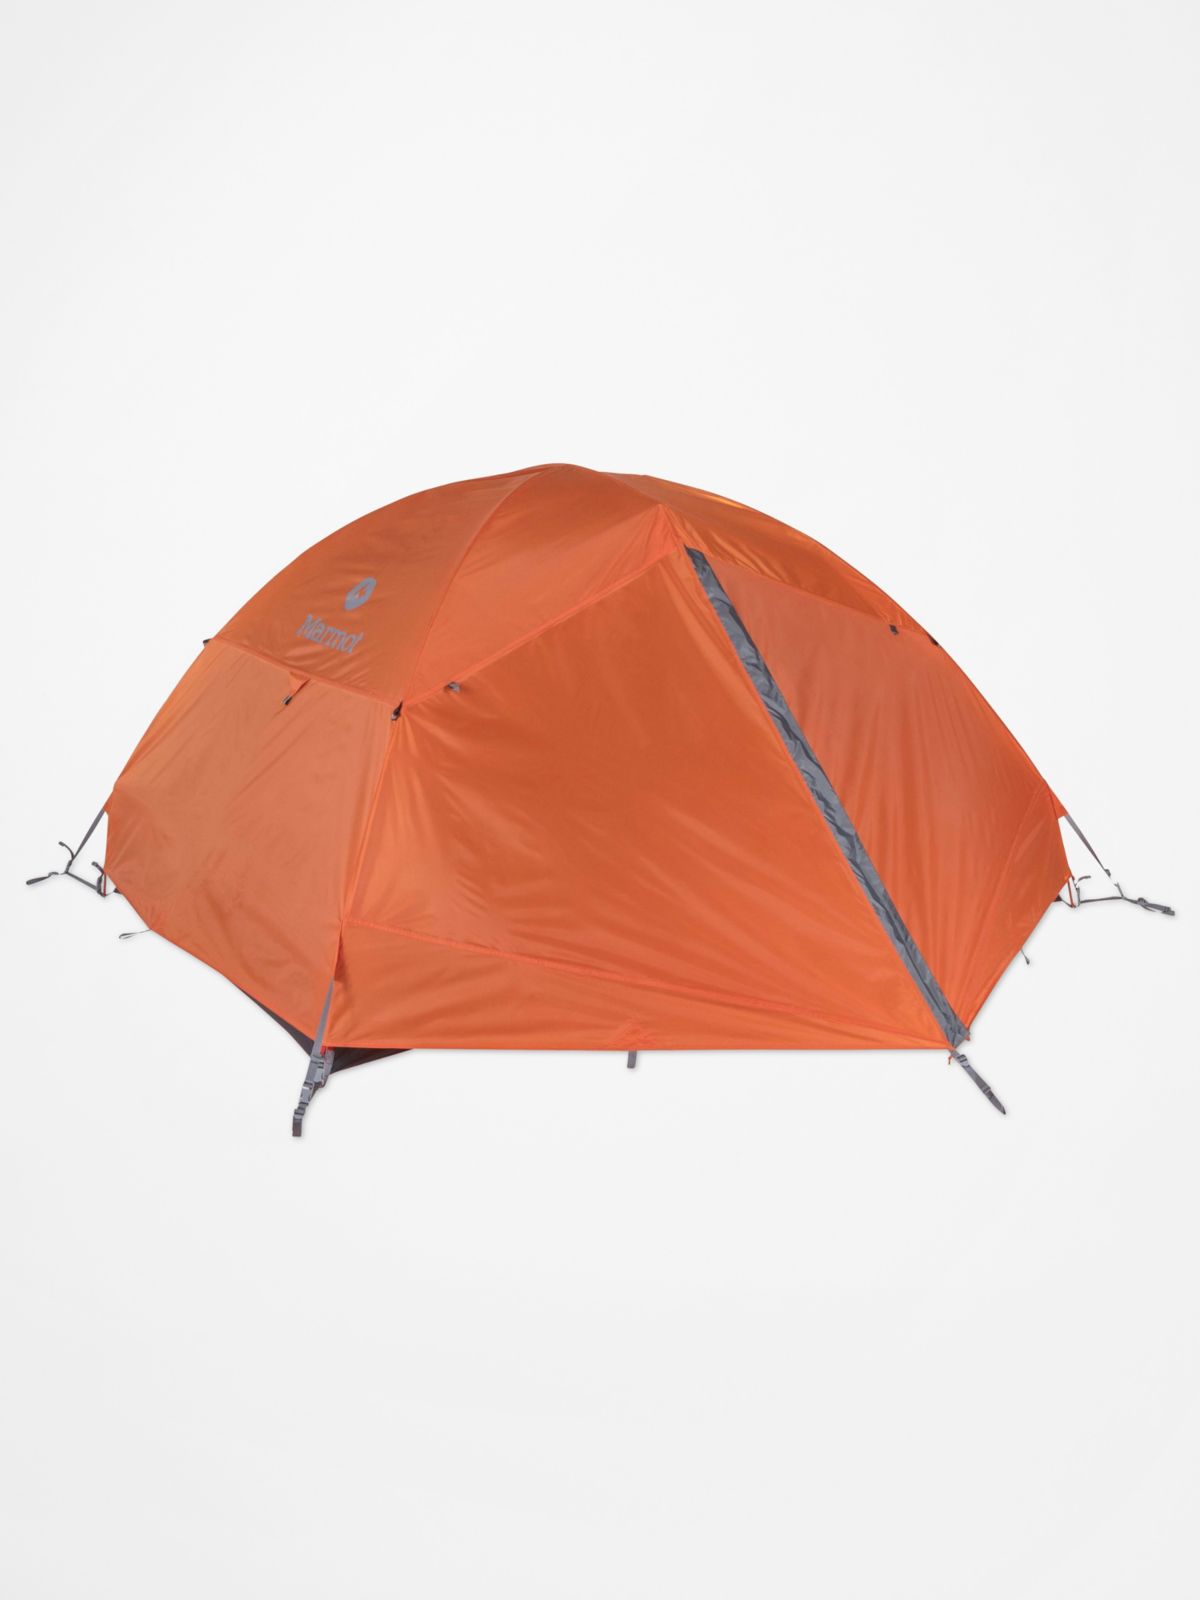 Fortress 3-Person Tent | Marmot